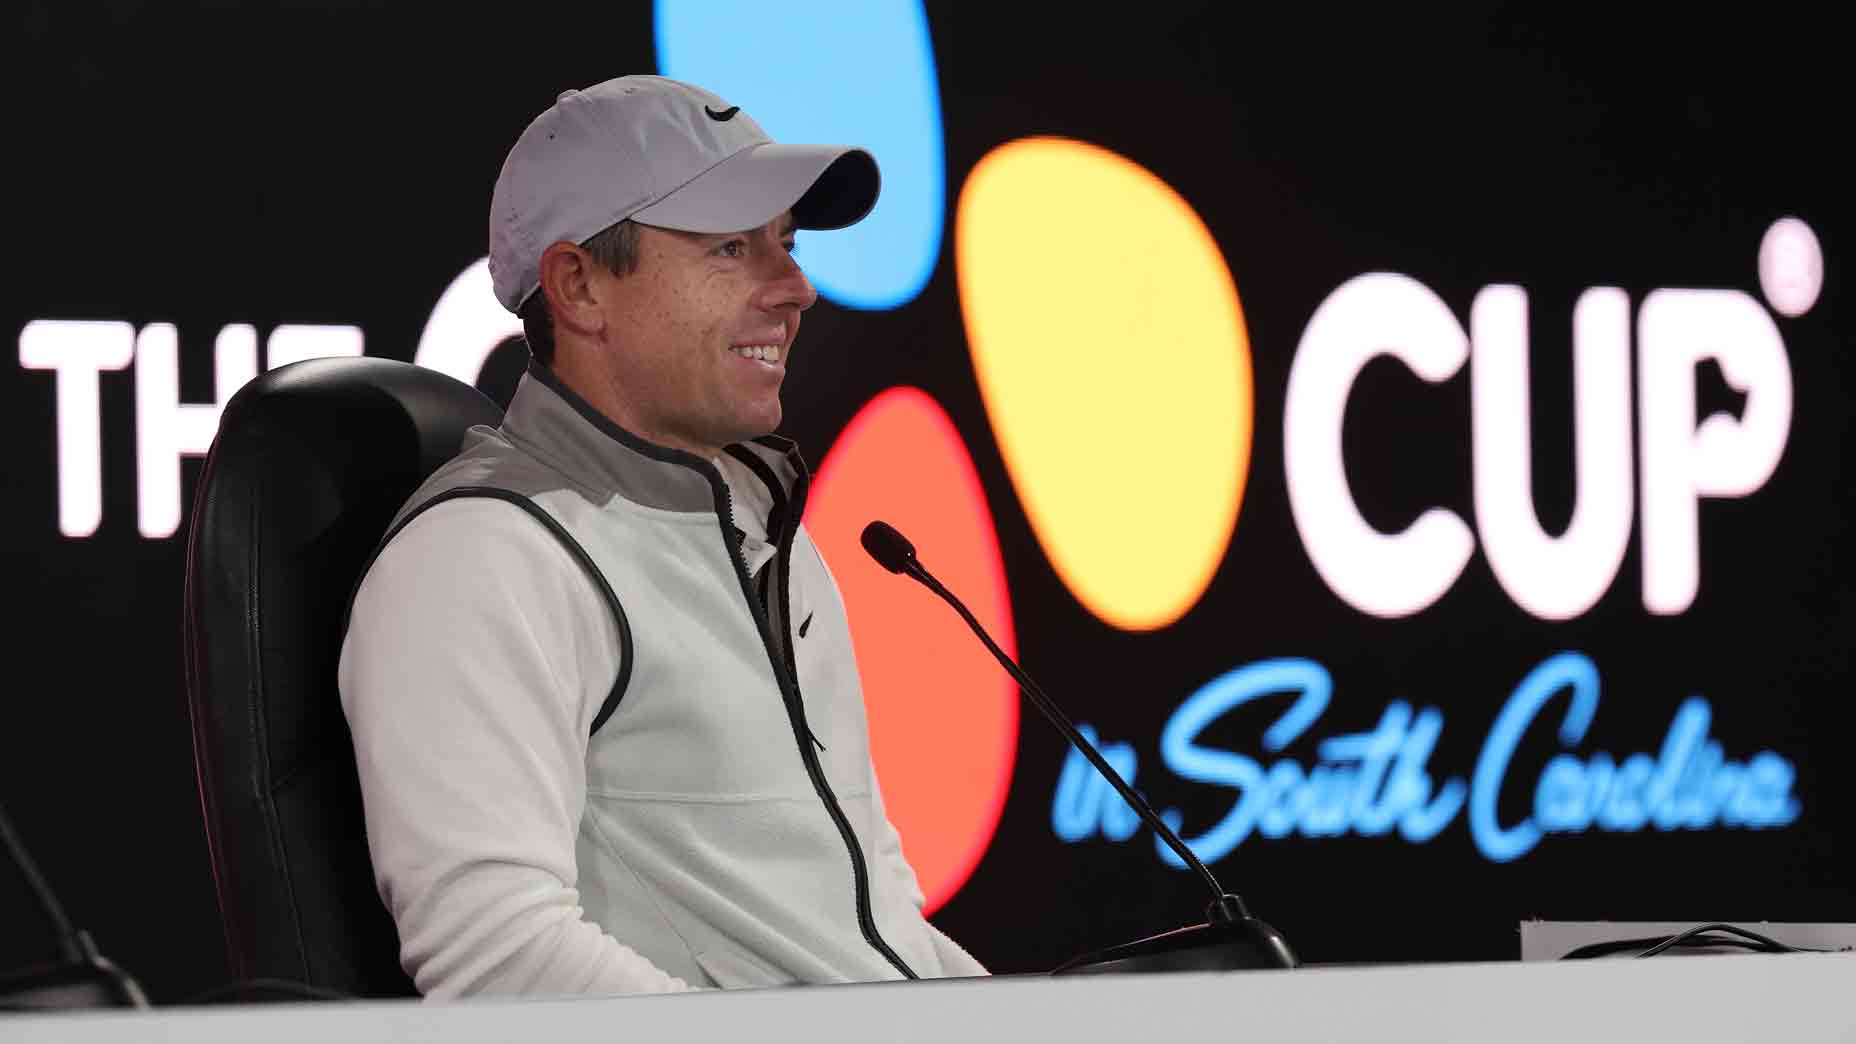 Pro surprises Rory McIlroy at press conference, gets priceless career advice